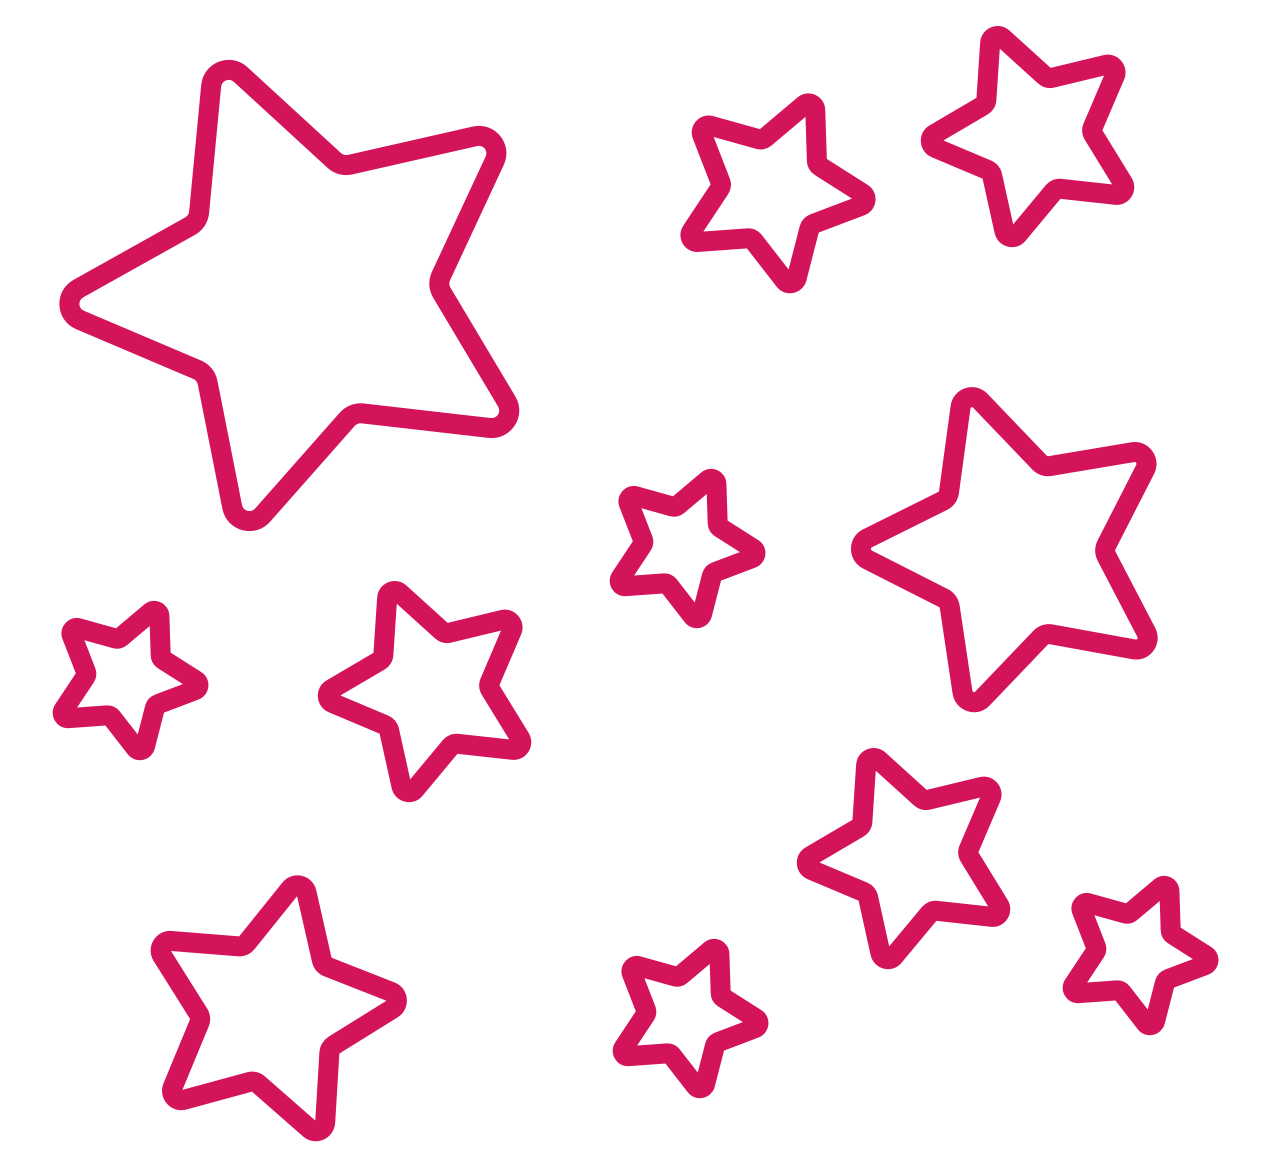 Image depicting the design of some stars